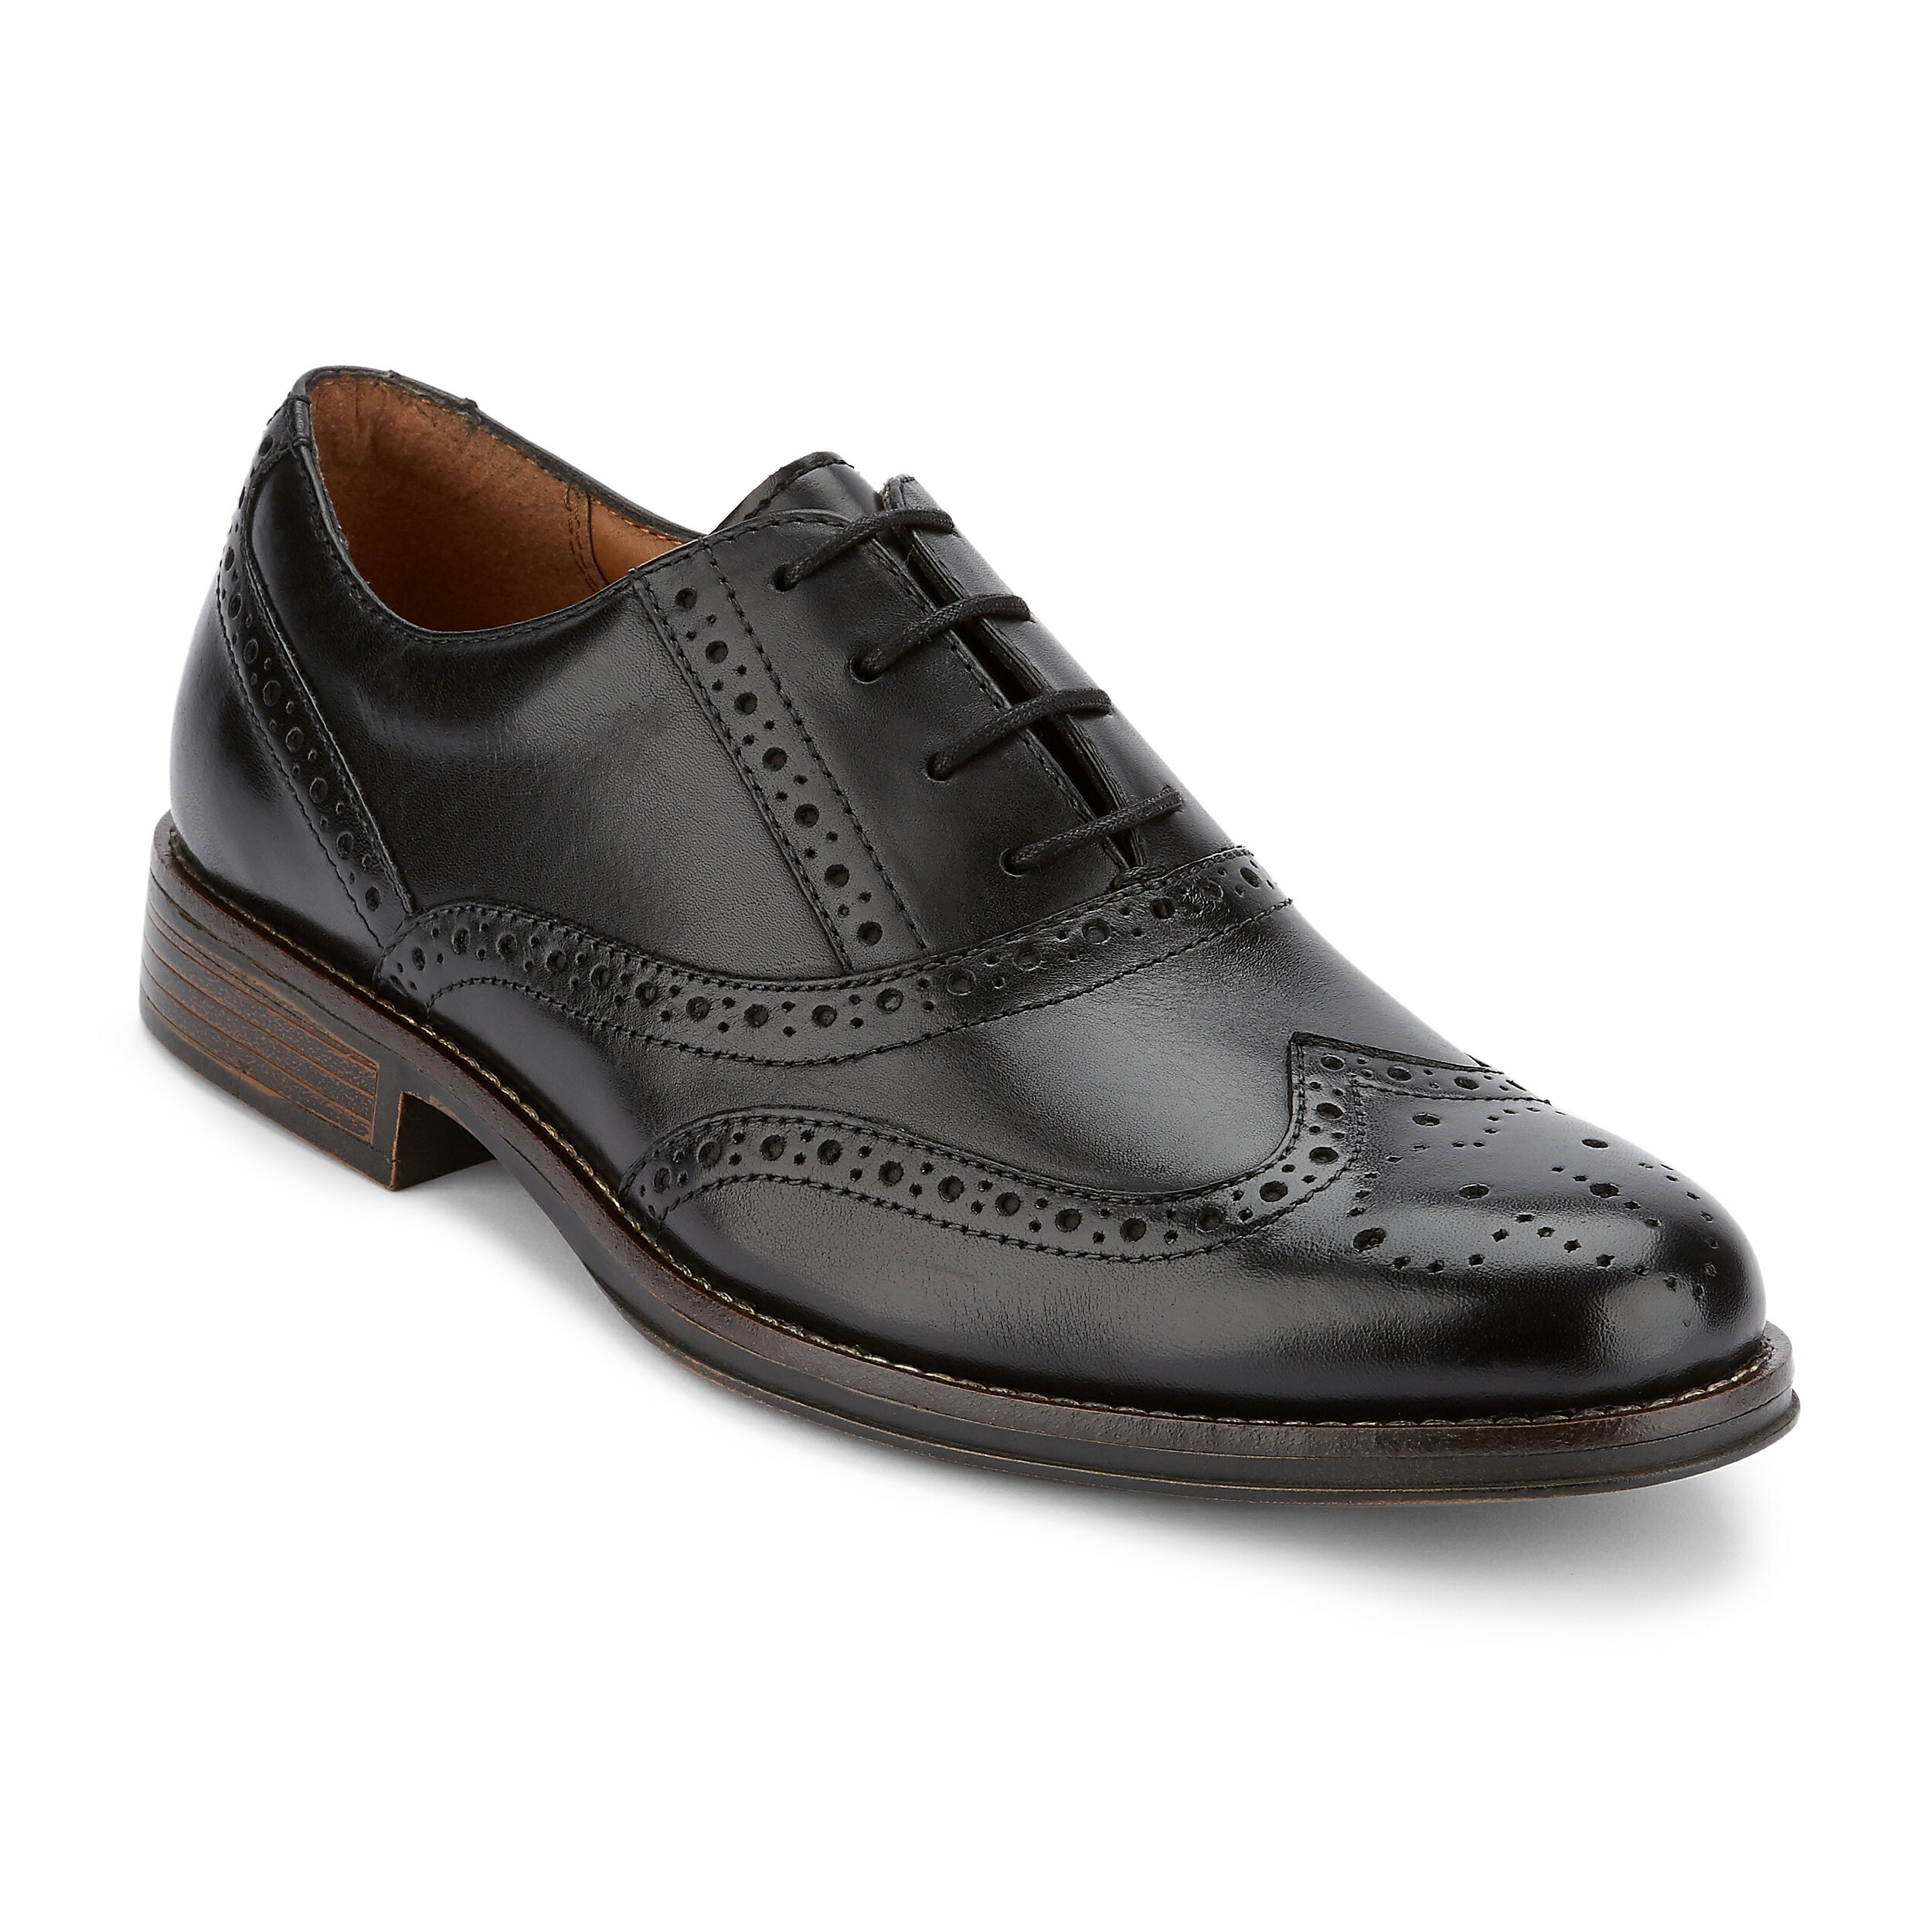 mens oxford wingtip shoes